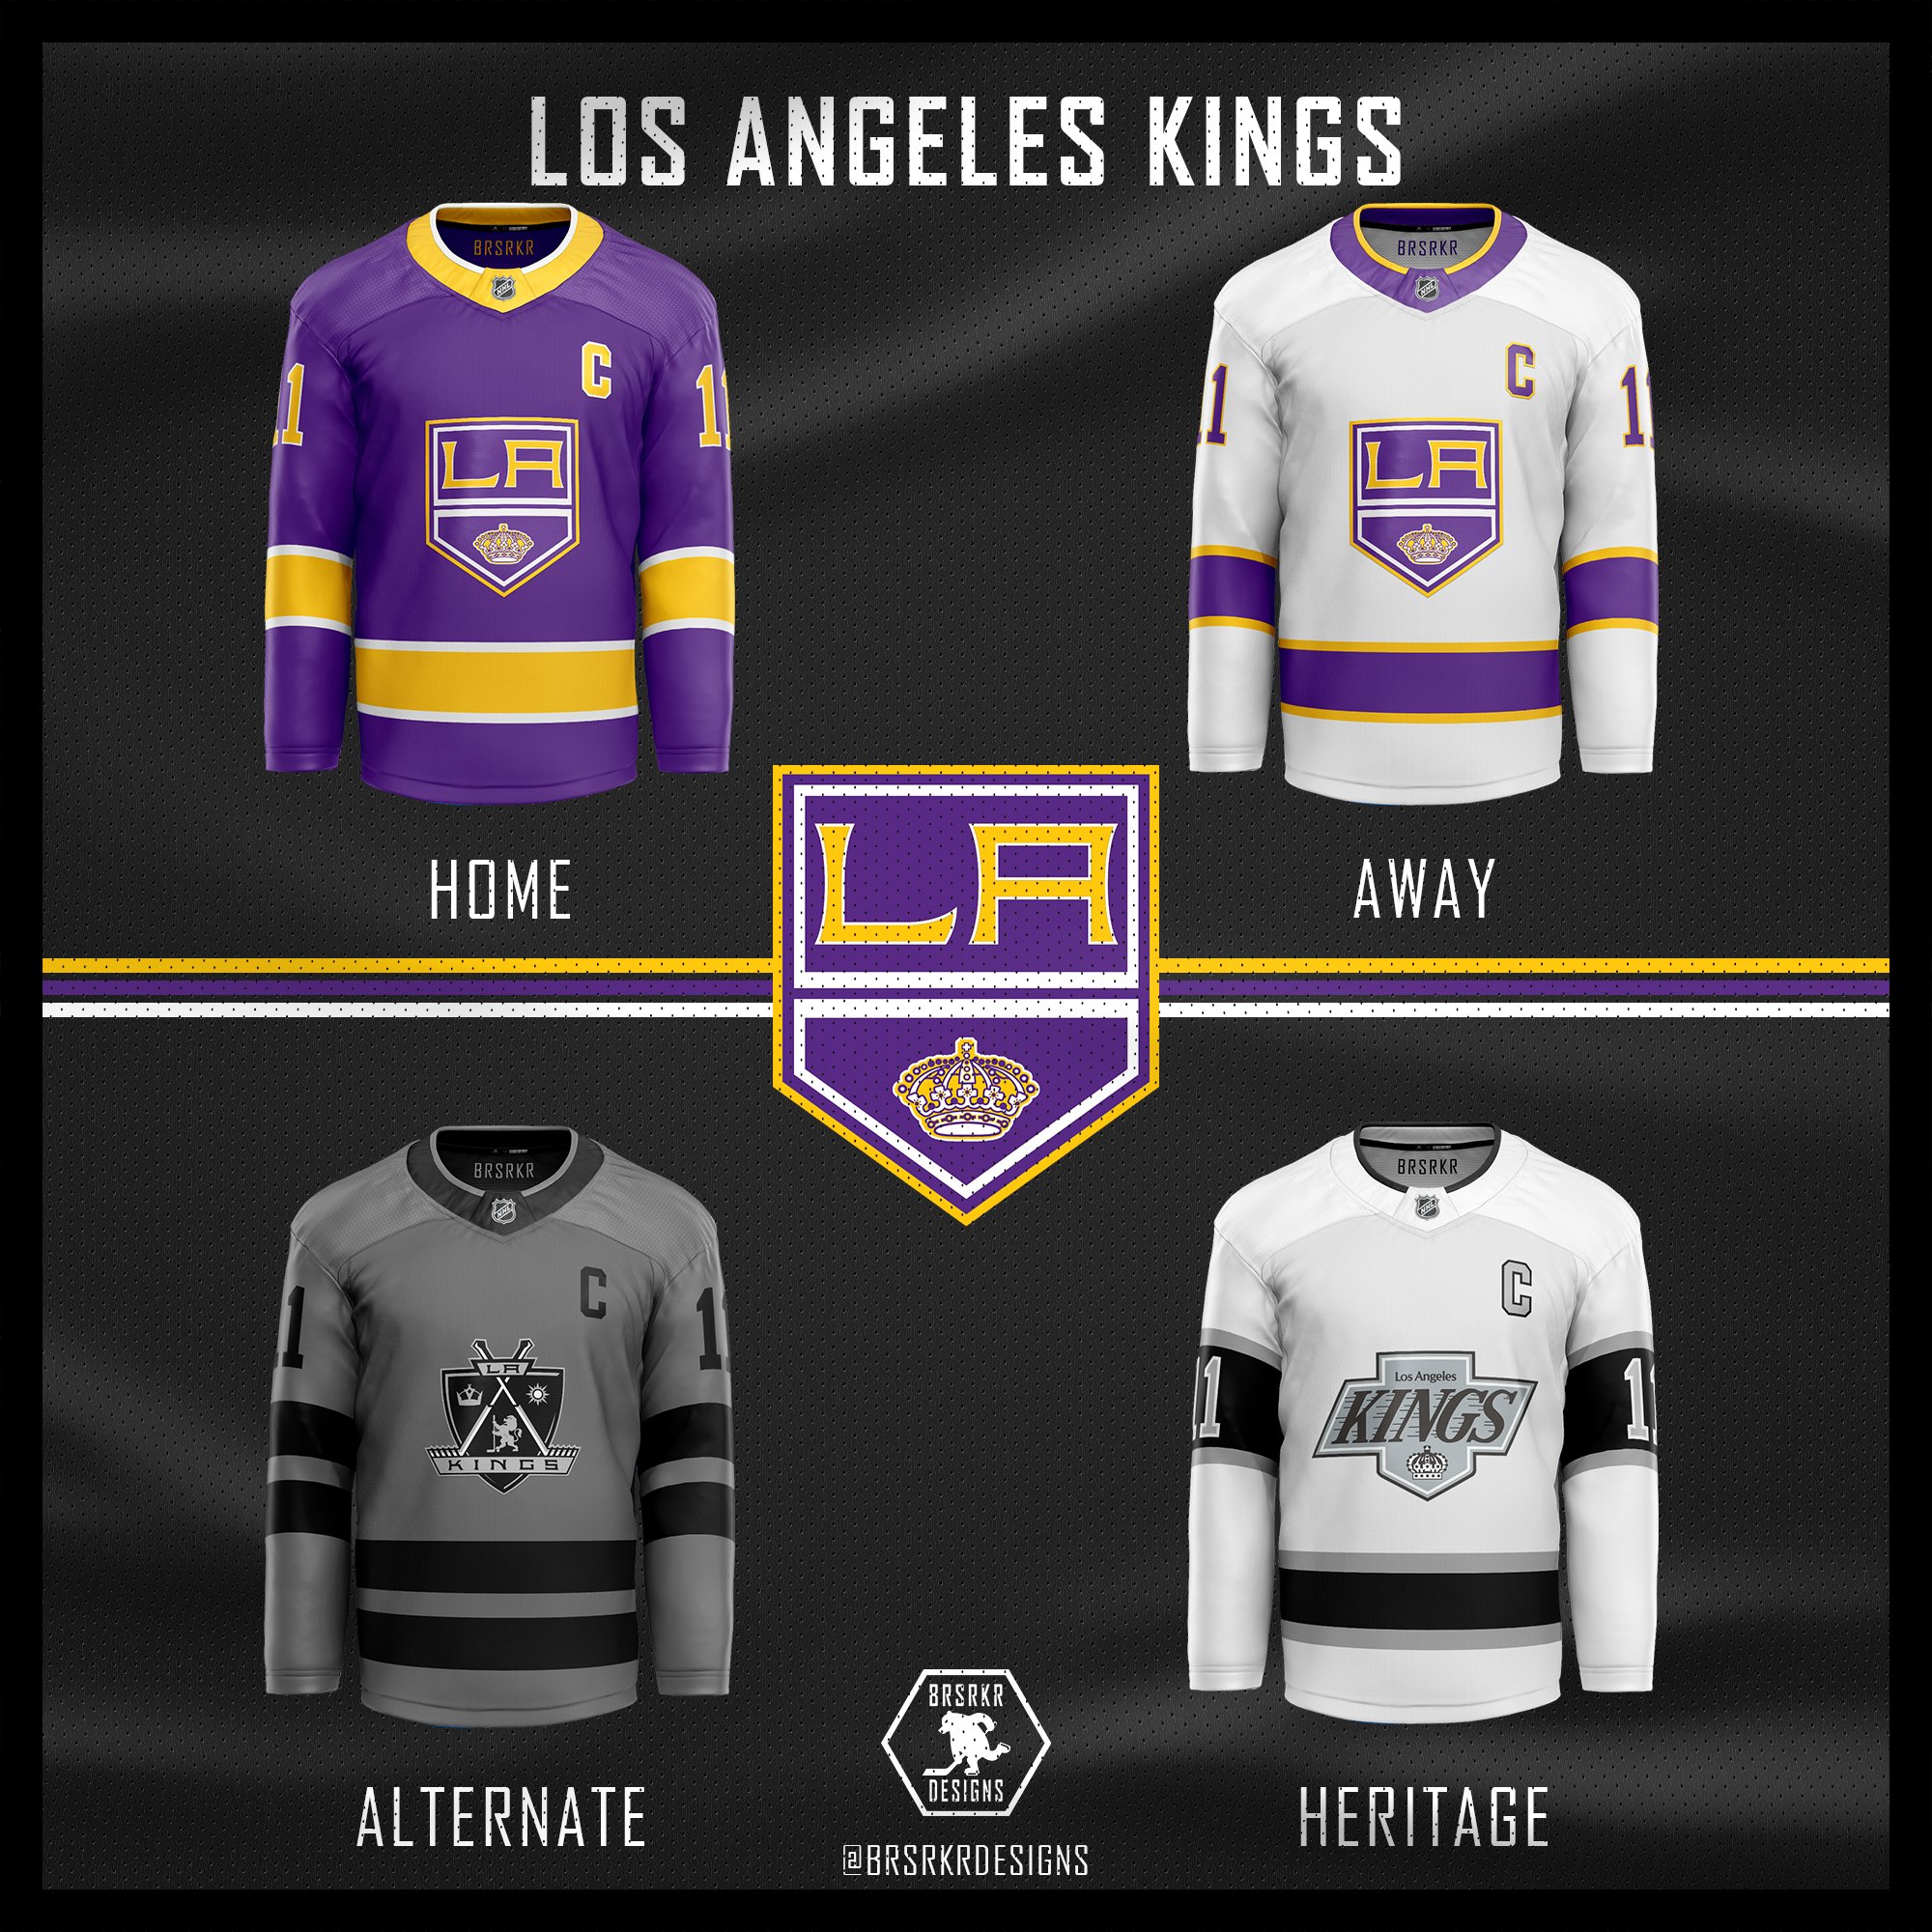 BrSrKr Designs on X: Another set of my Ideal jerseys done : Los Angeles  Kings The Kings get the color treatment and I really like what I could do  with their logo (